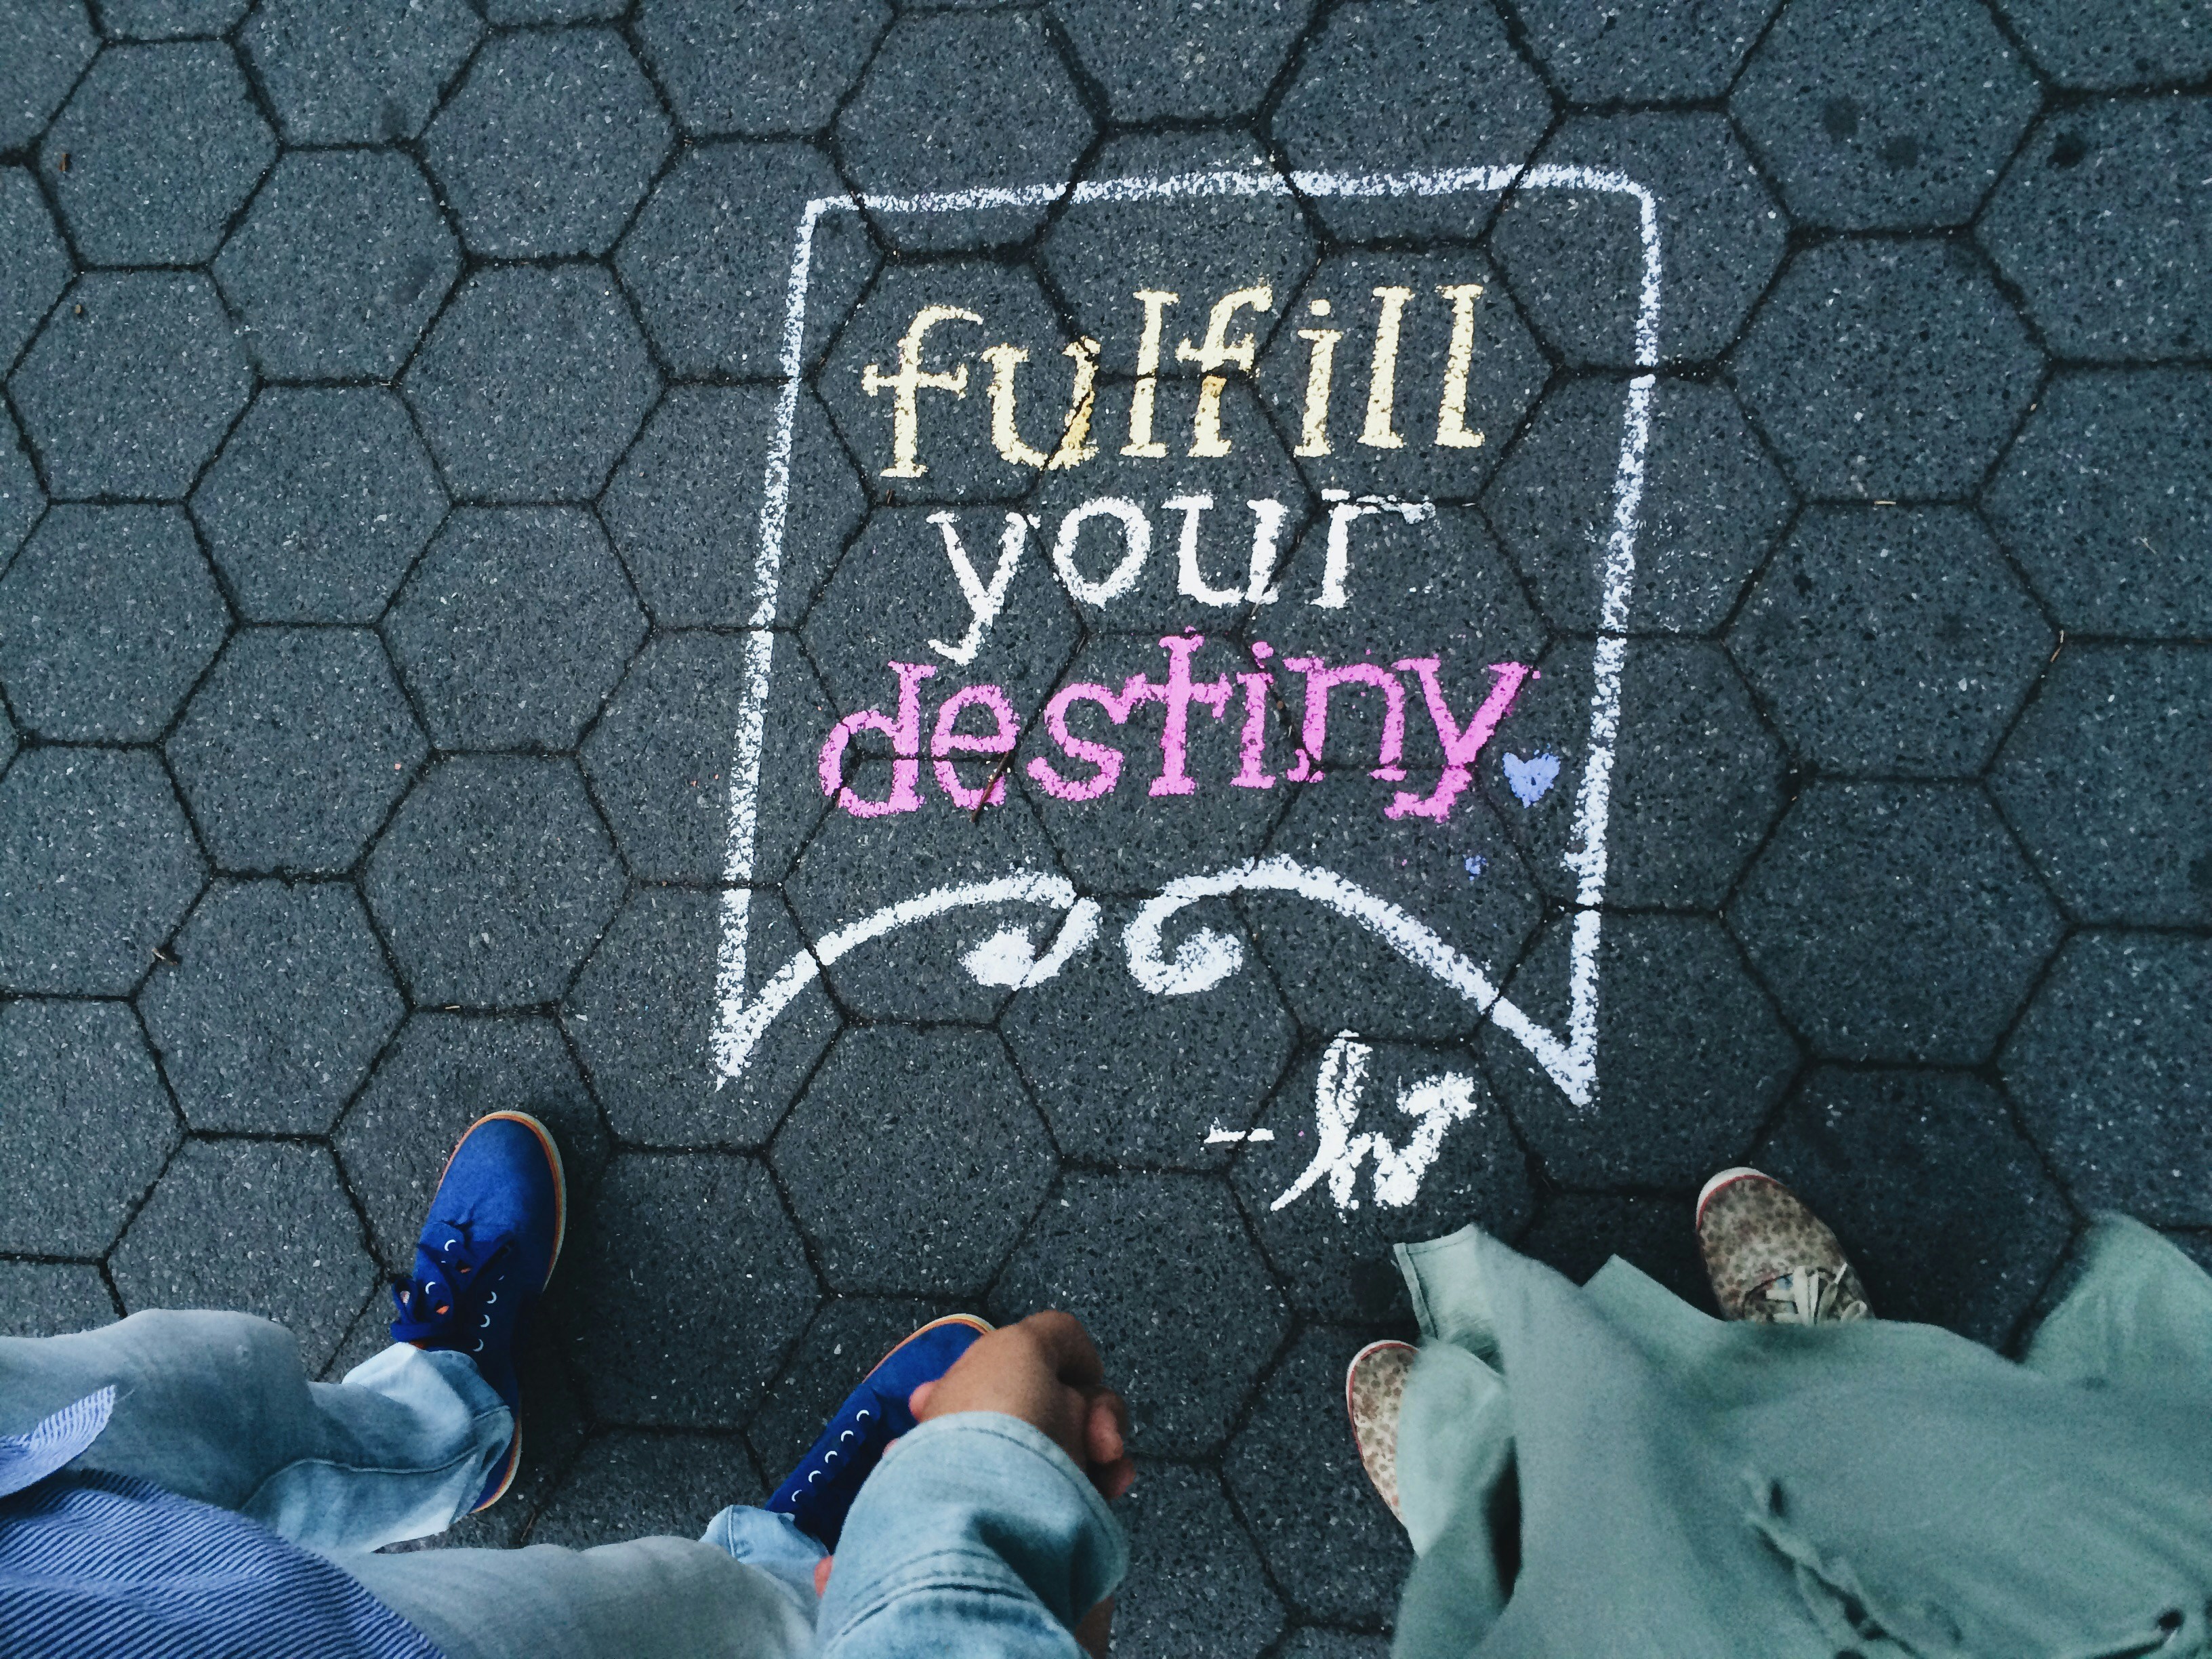 Fulfill your destiny affirmation